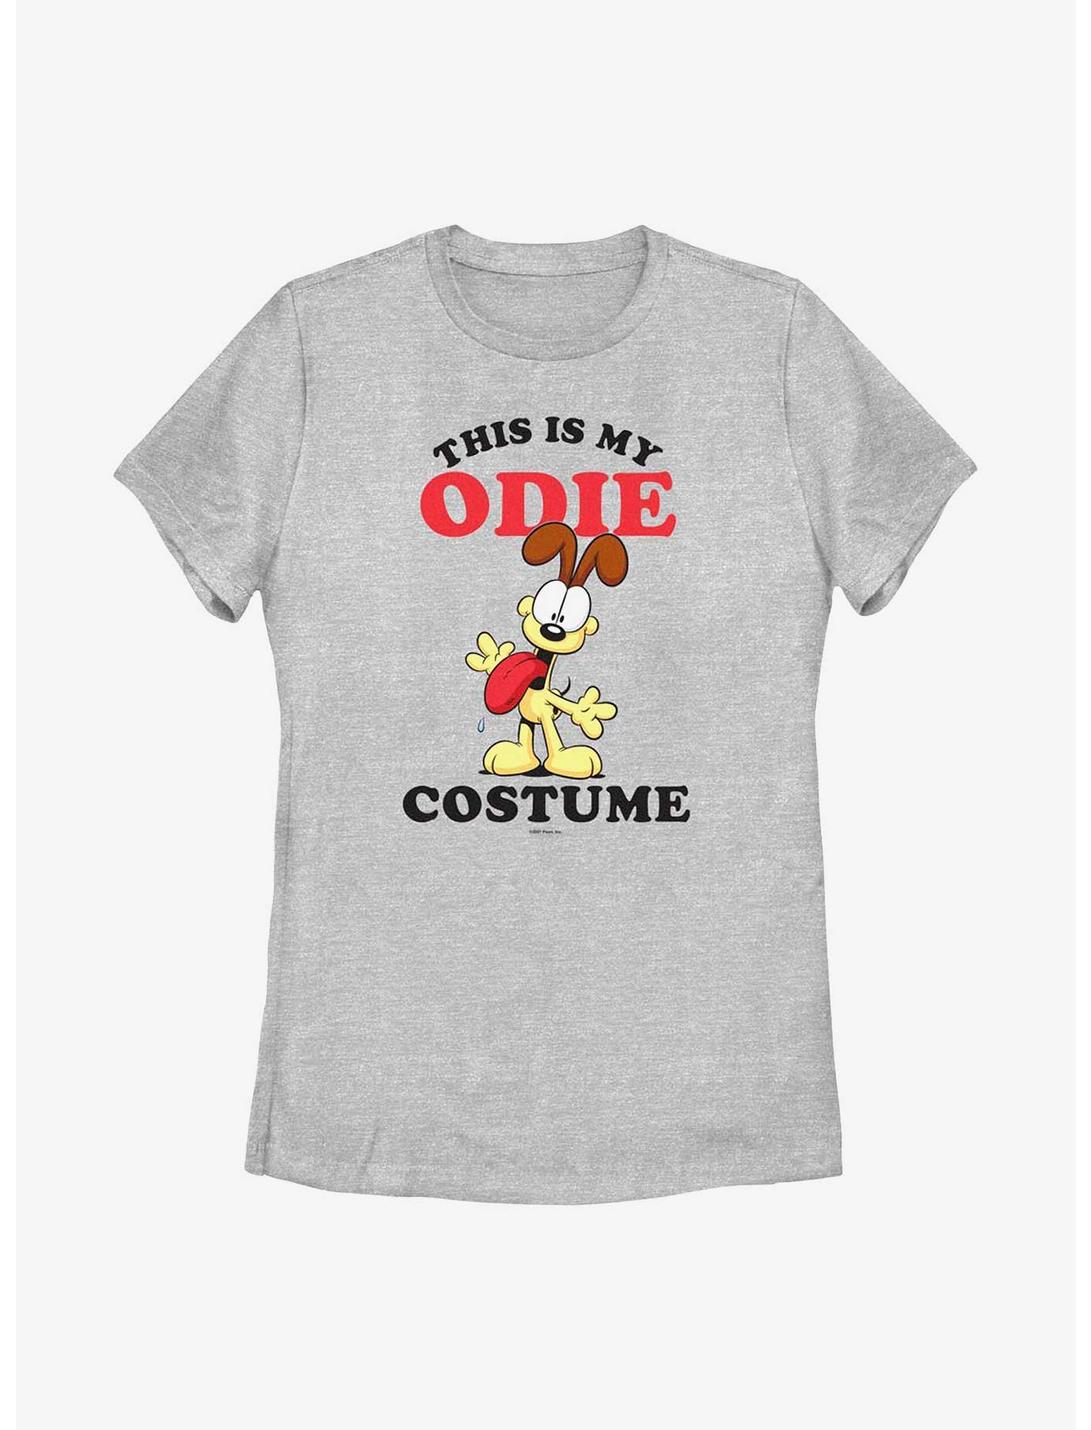 Garfield Odie Costume Women's T-Shirt, ATH HTR, hi-res